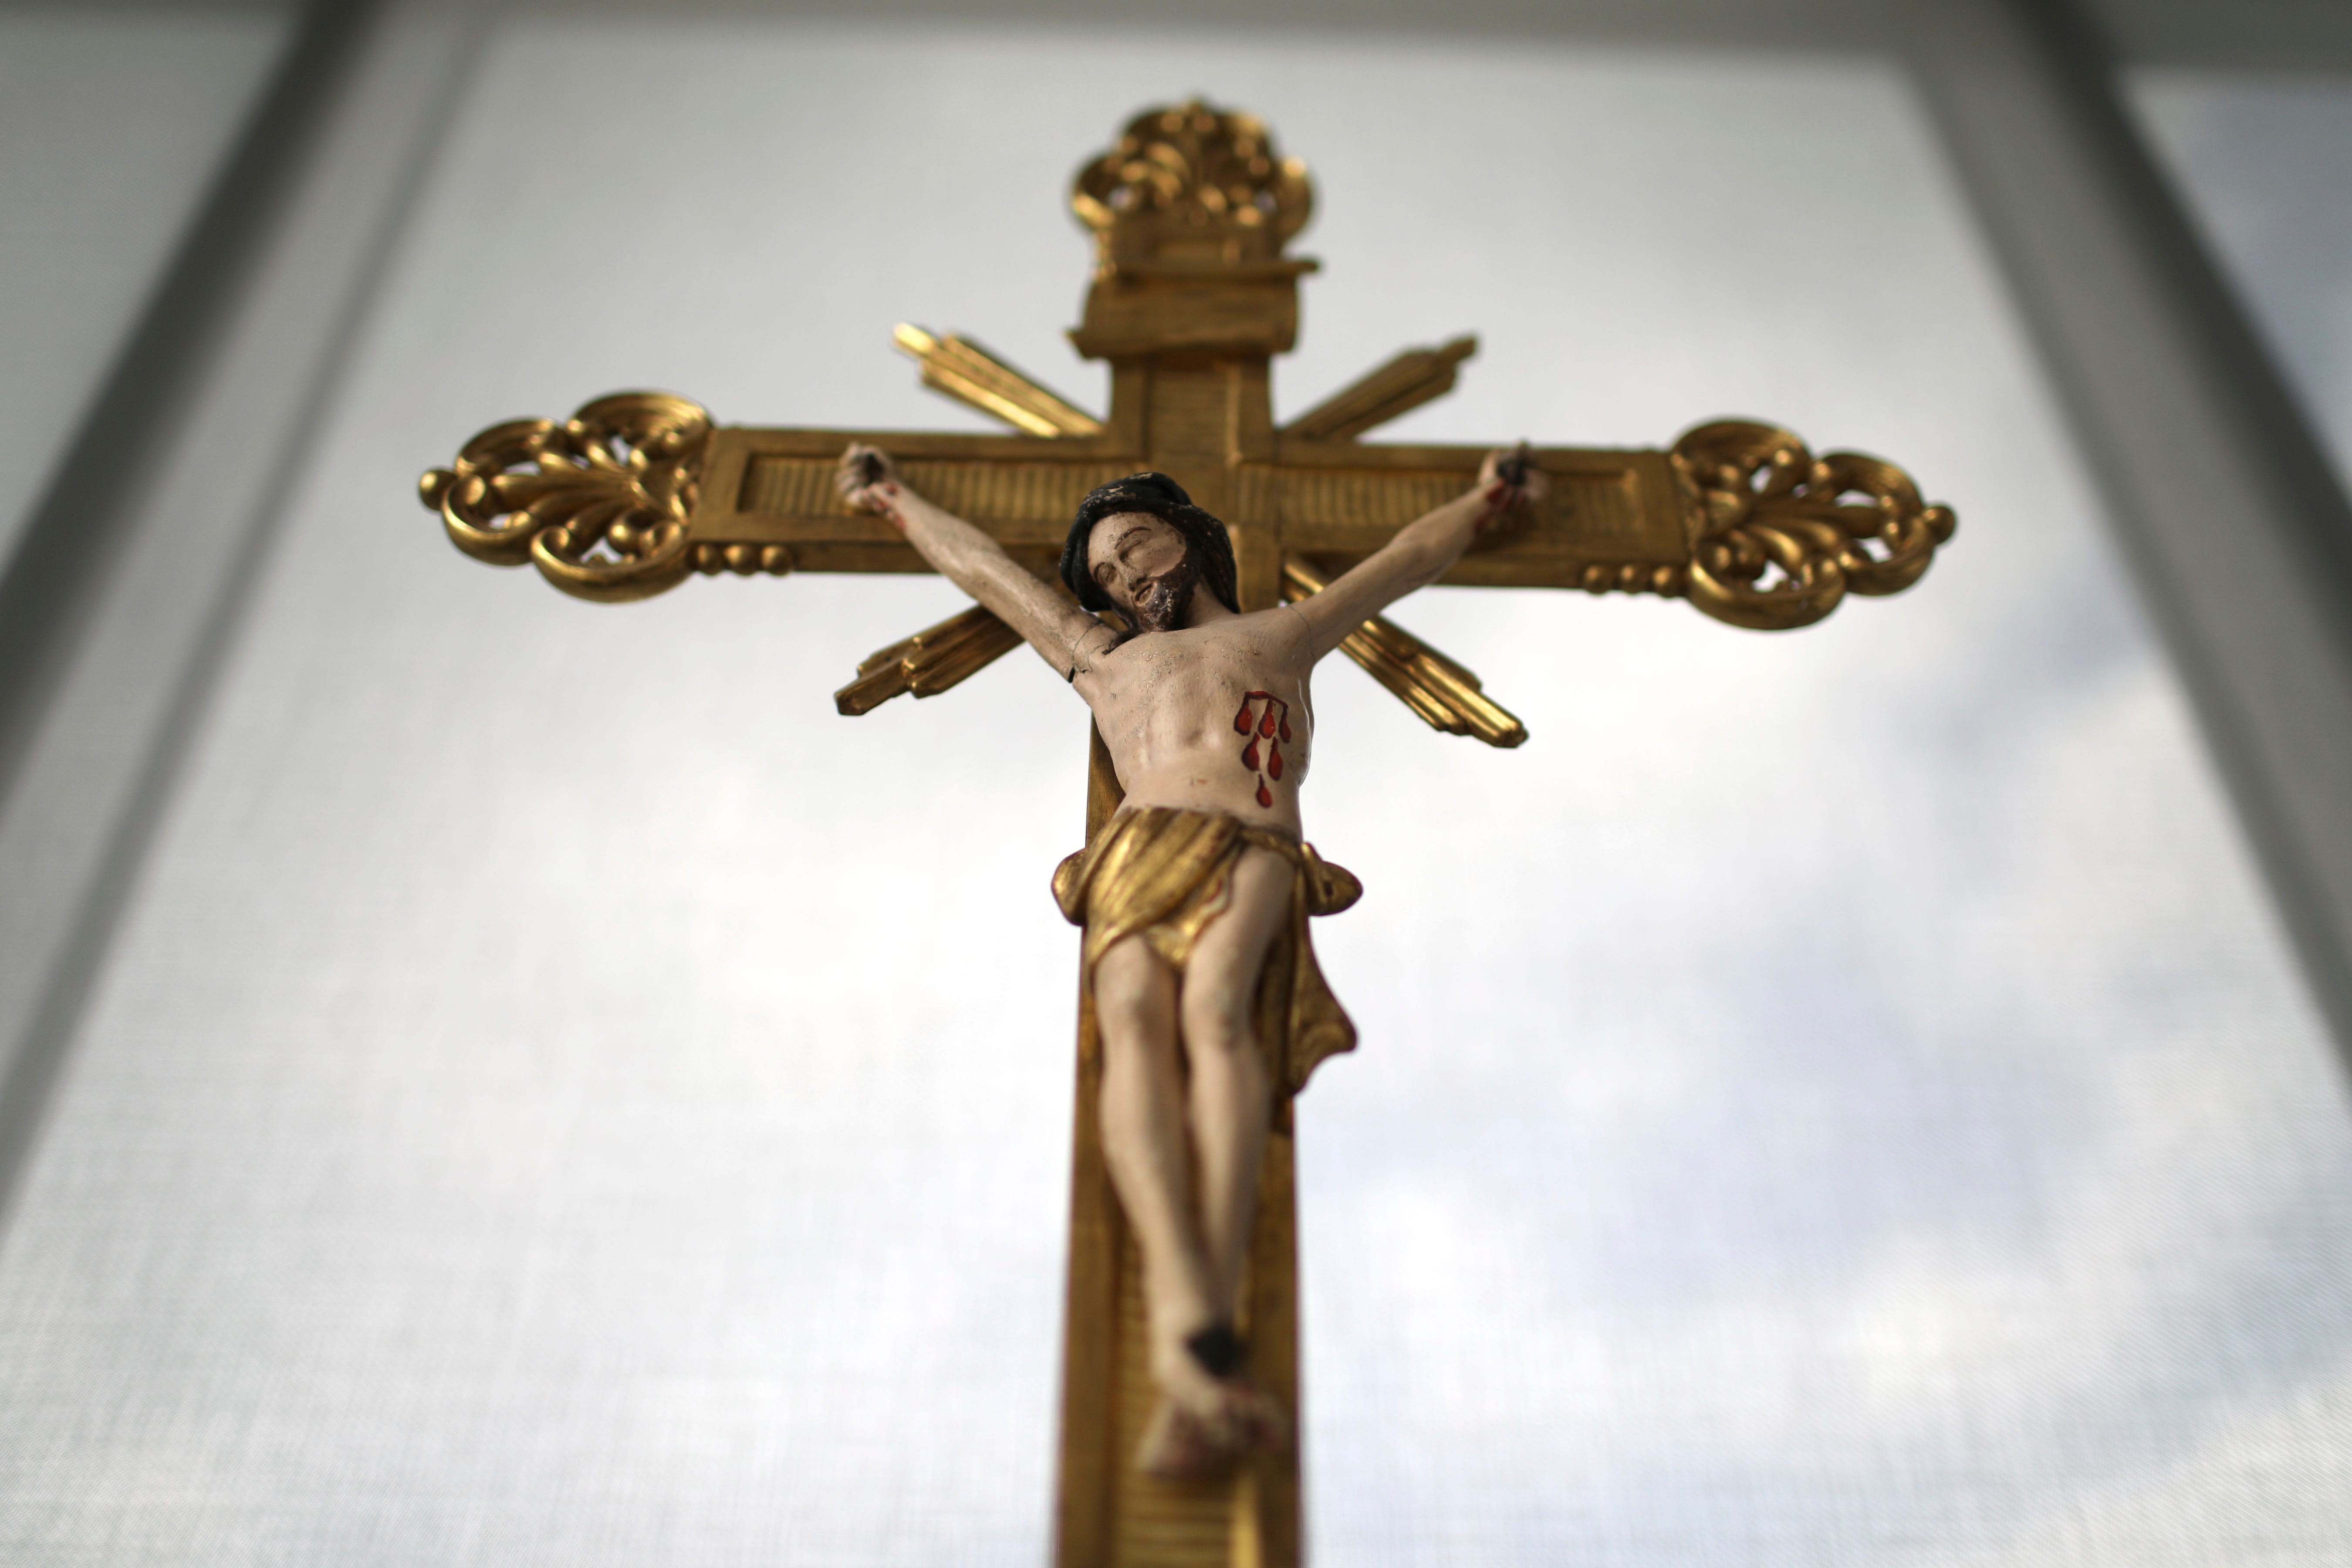 An antique crucifix is displayed the prayer room in the apartment of Laura Pontikes in Houston on April 13, 2019.